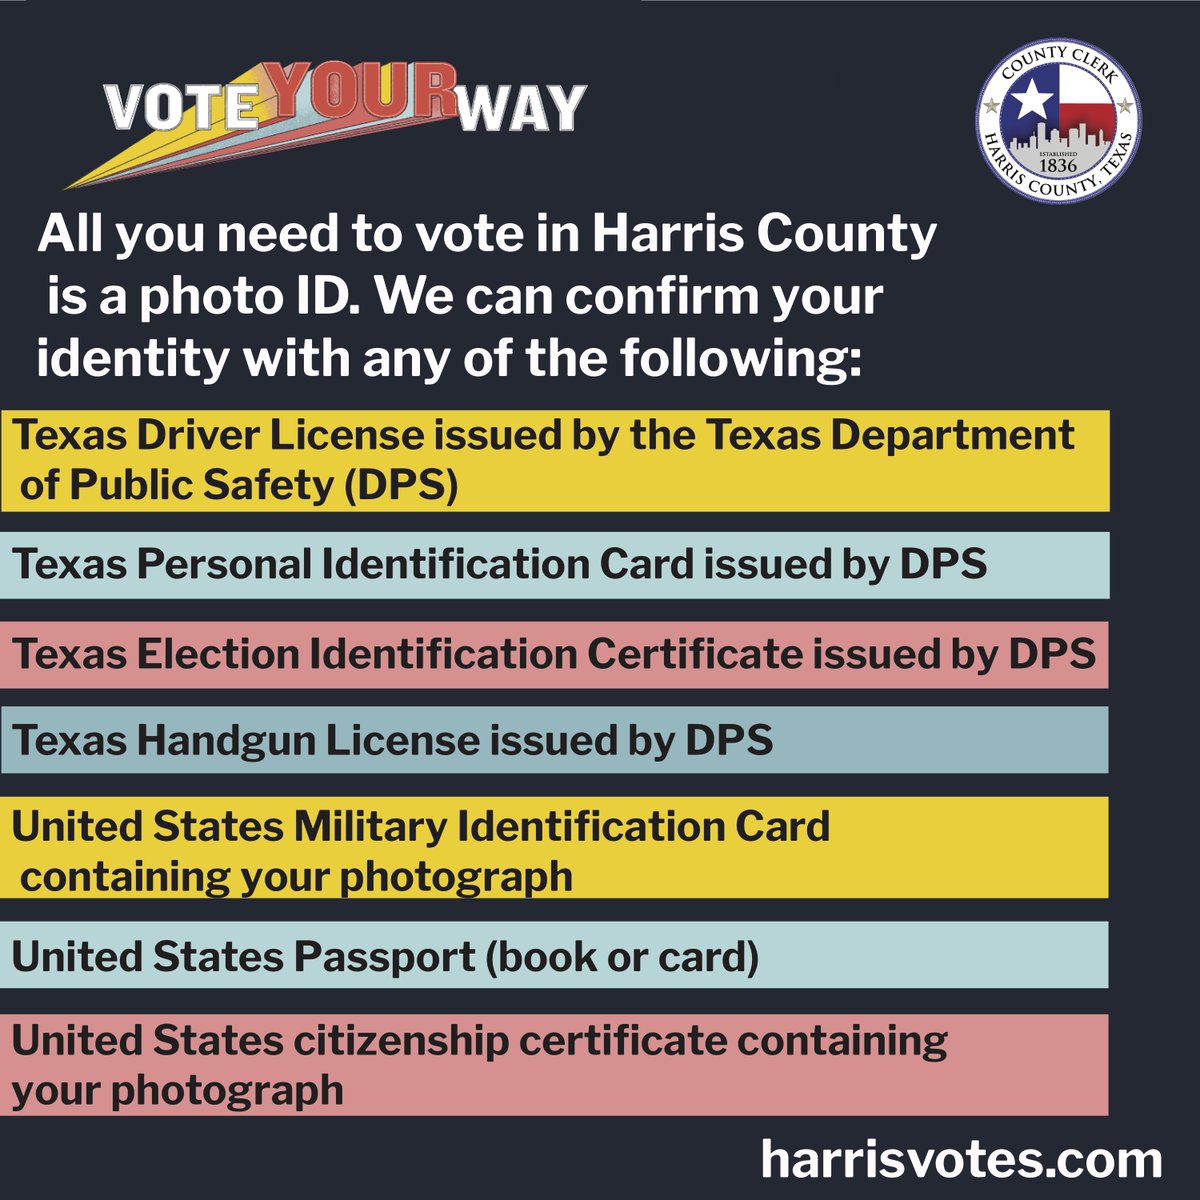 You only need one form of ID to vote. Your driver’s license works just fine, but there are other options.  https://www.harrisvotes.com/VotingInfo?lang=en-US#IDs  #HarrisVotes